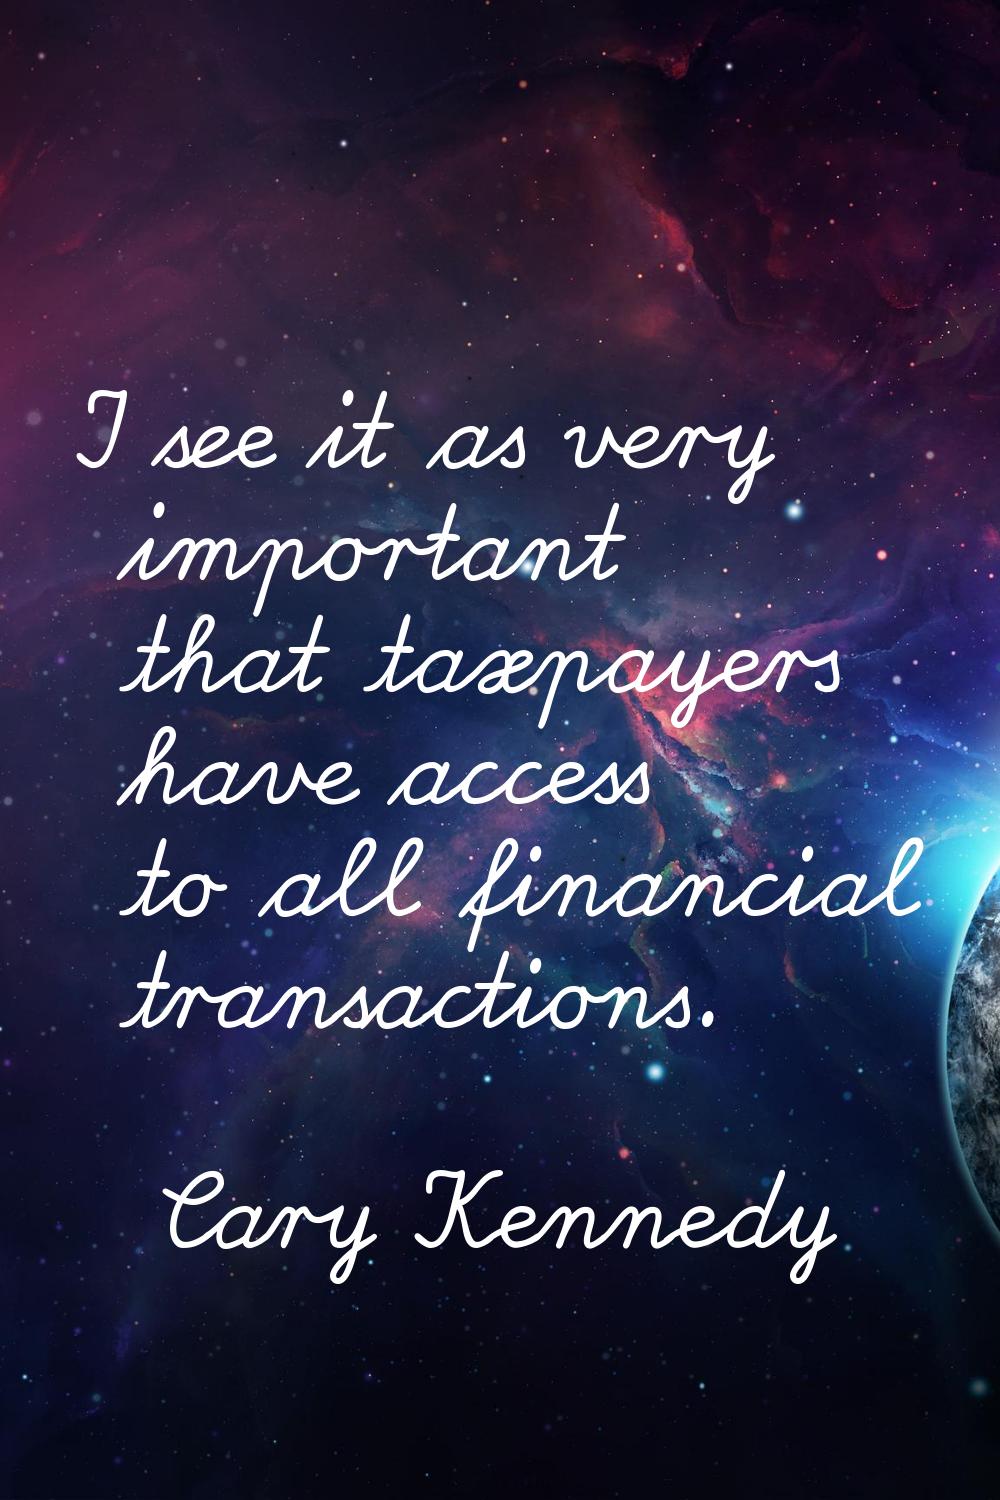 I see it as very important that taxpayers have access to all financial transactions.